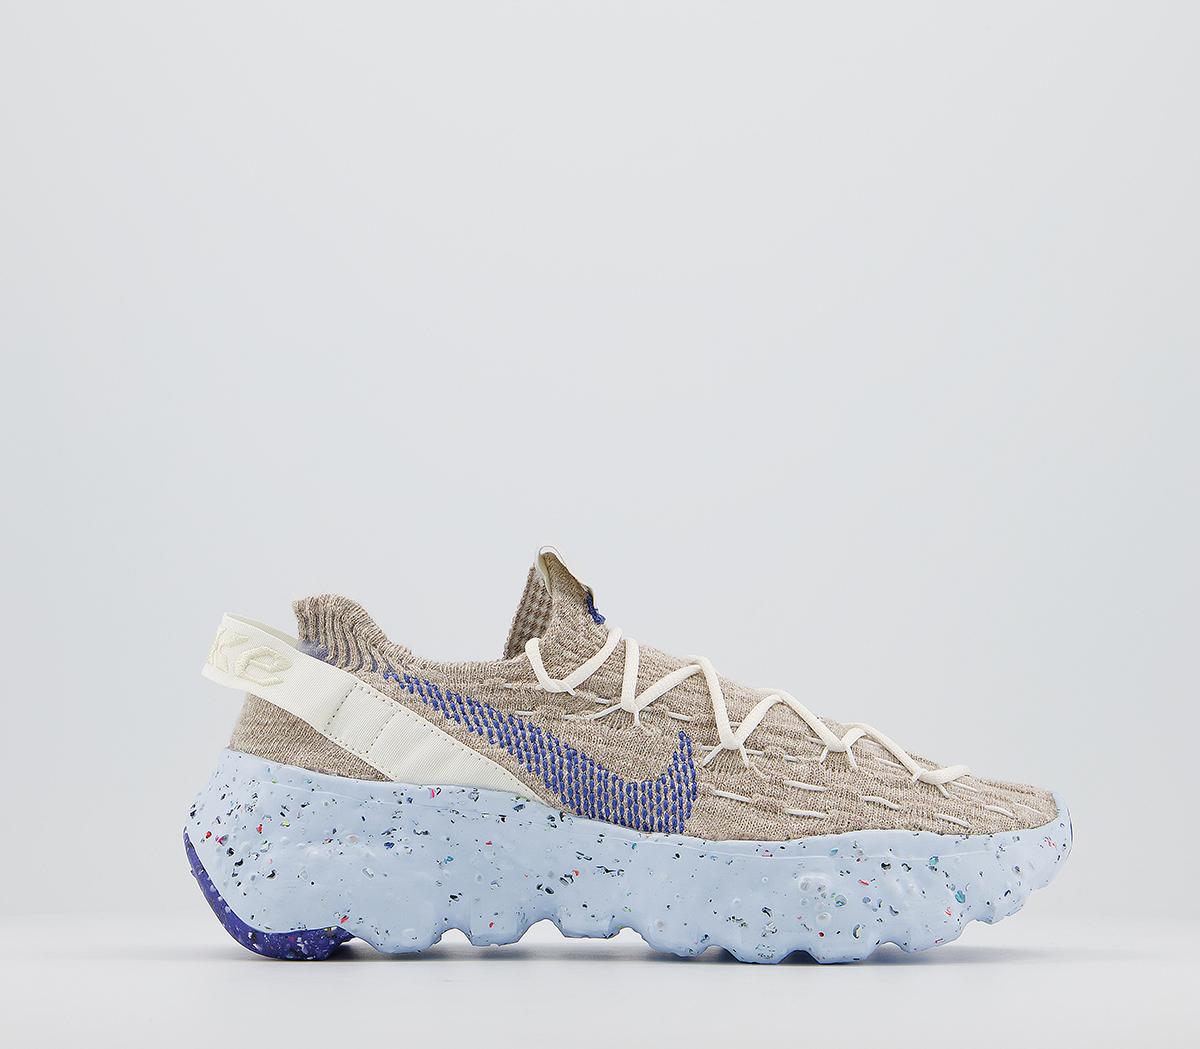 NikeSpace Hippie 4 TrainersSail Astronomy Blue Fossil Chambray Blue